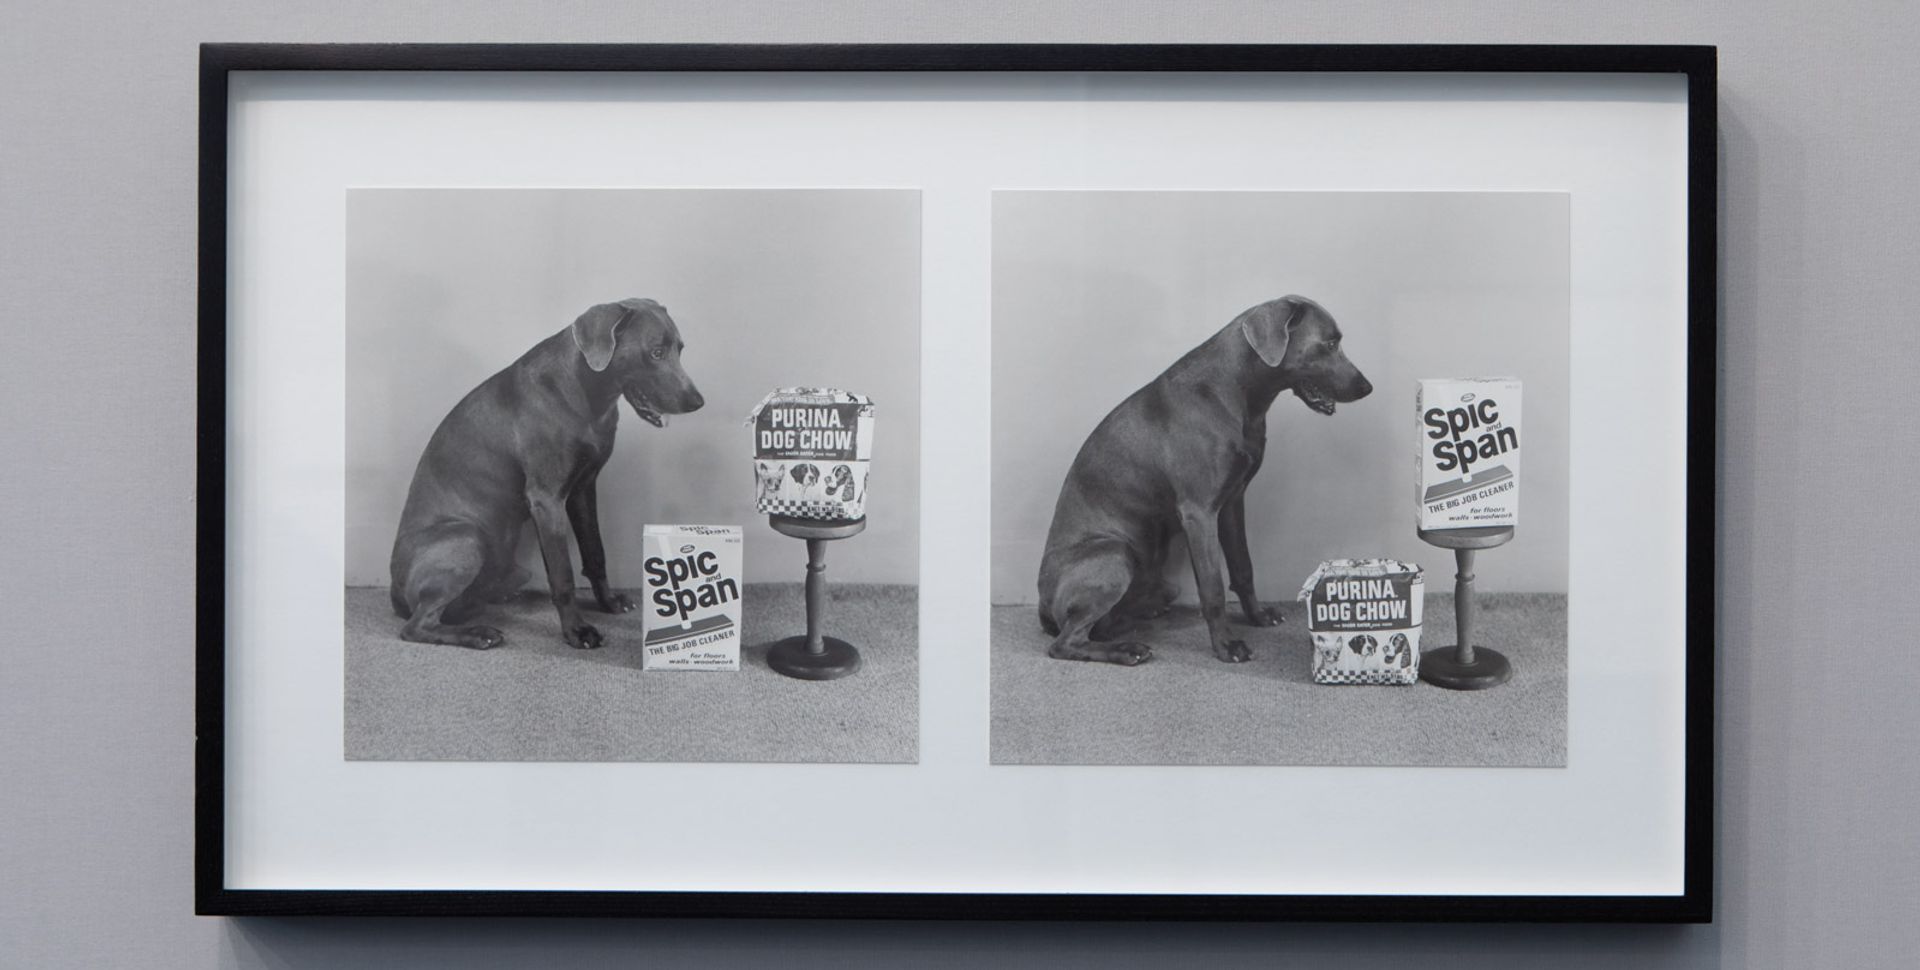  William Wegman, Spic and Chow/Span and Chow (1975), $40,000. Sperone Westwater, Frieze Masters. Photo: © David Owens